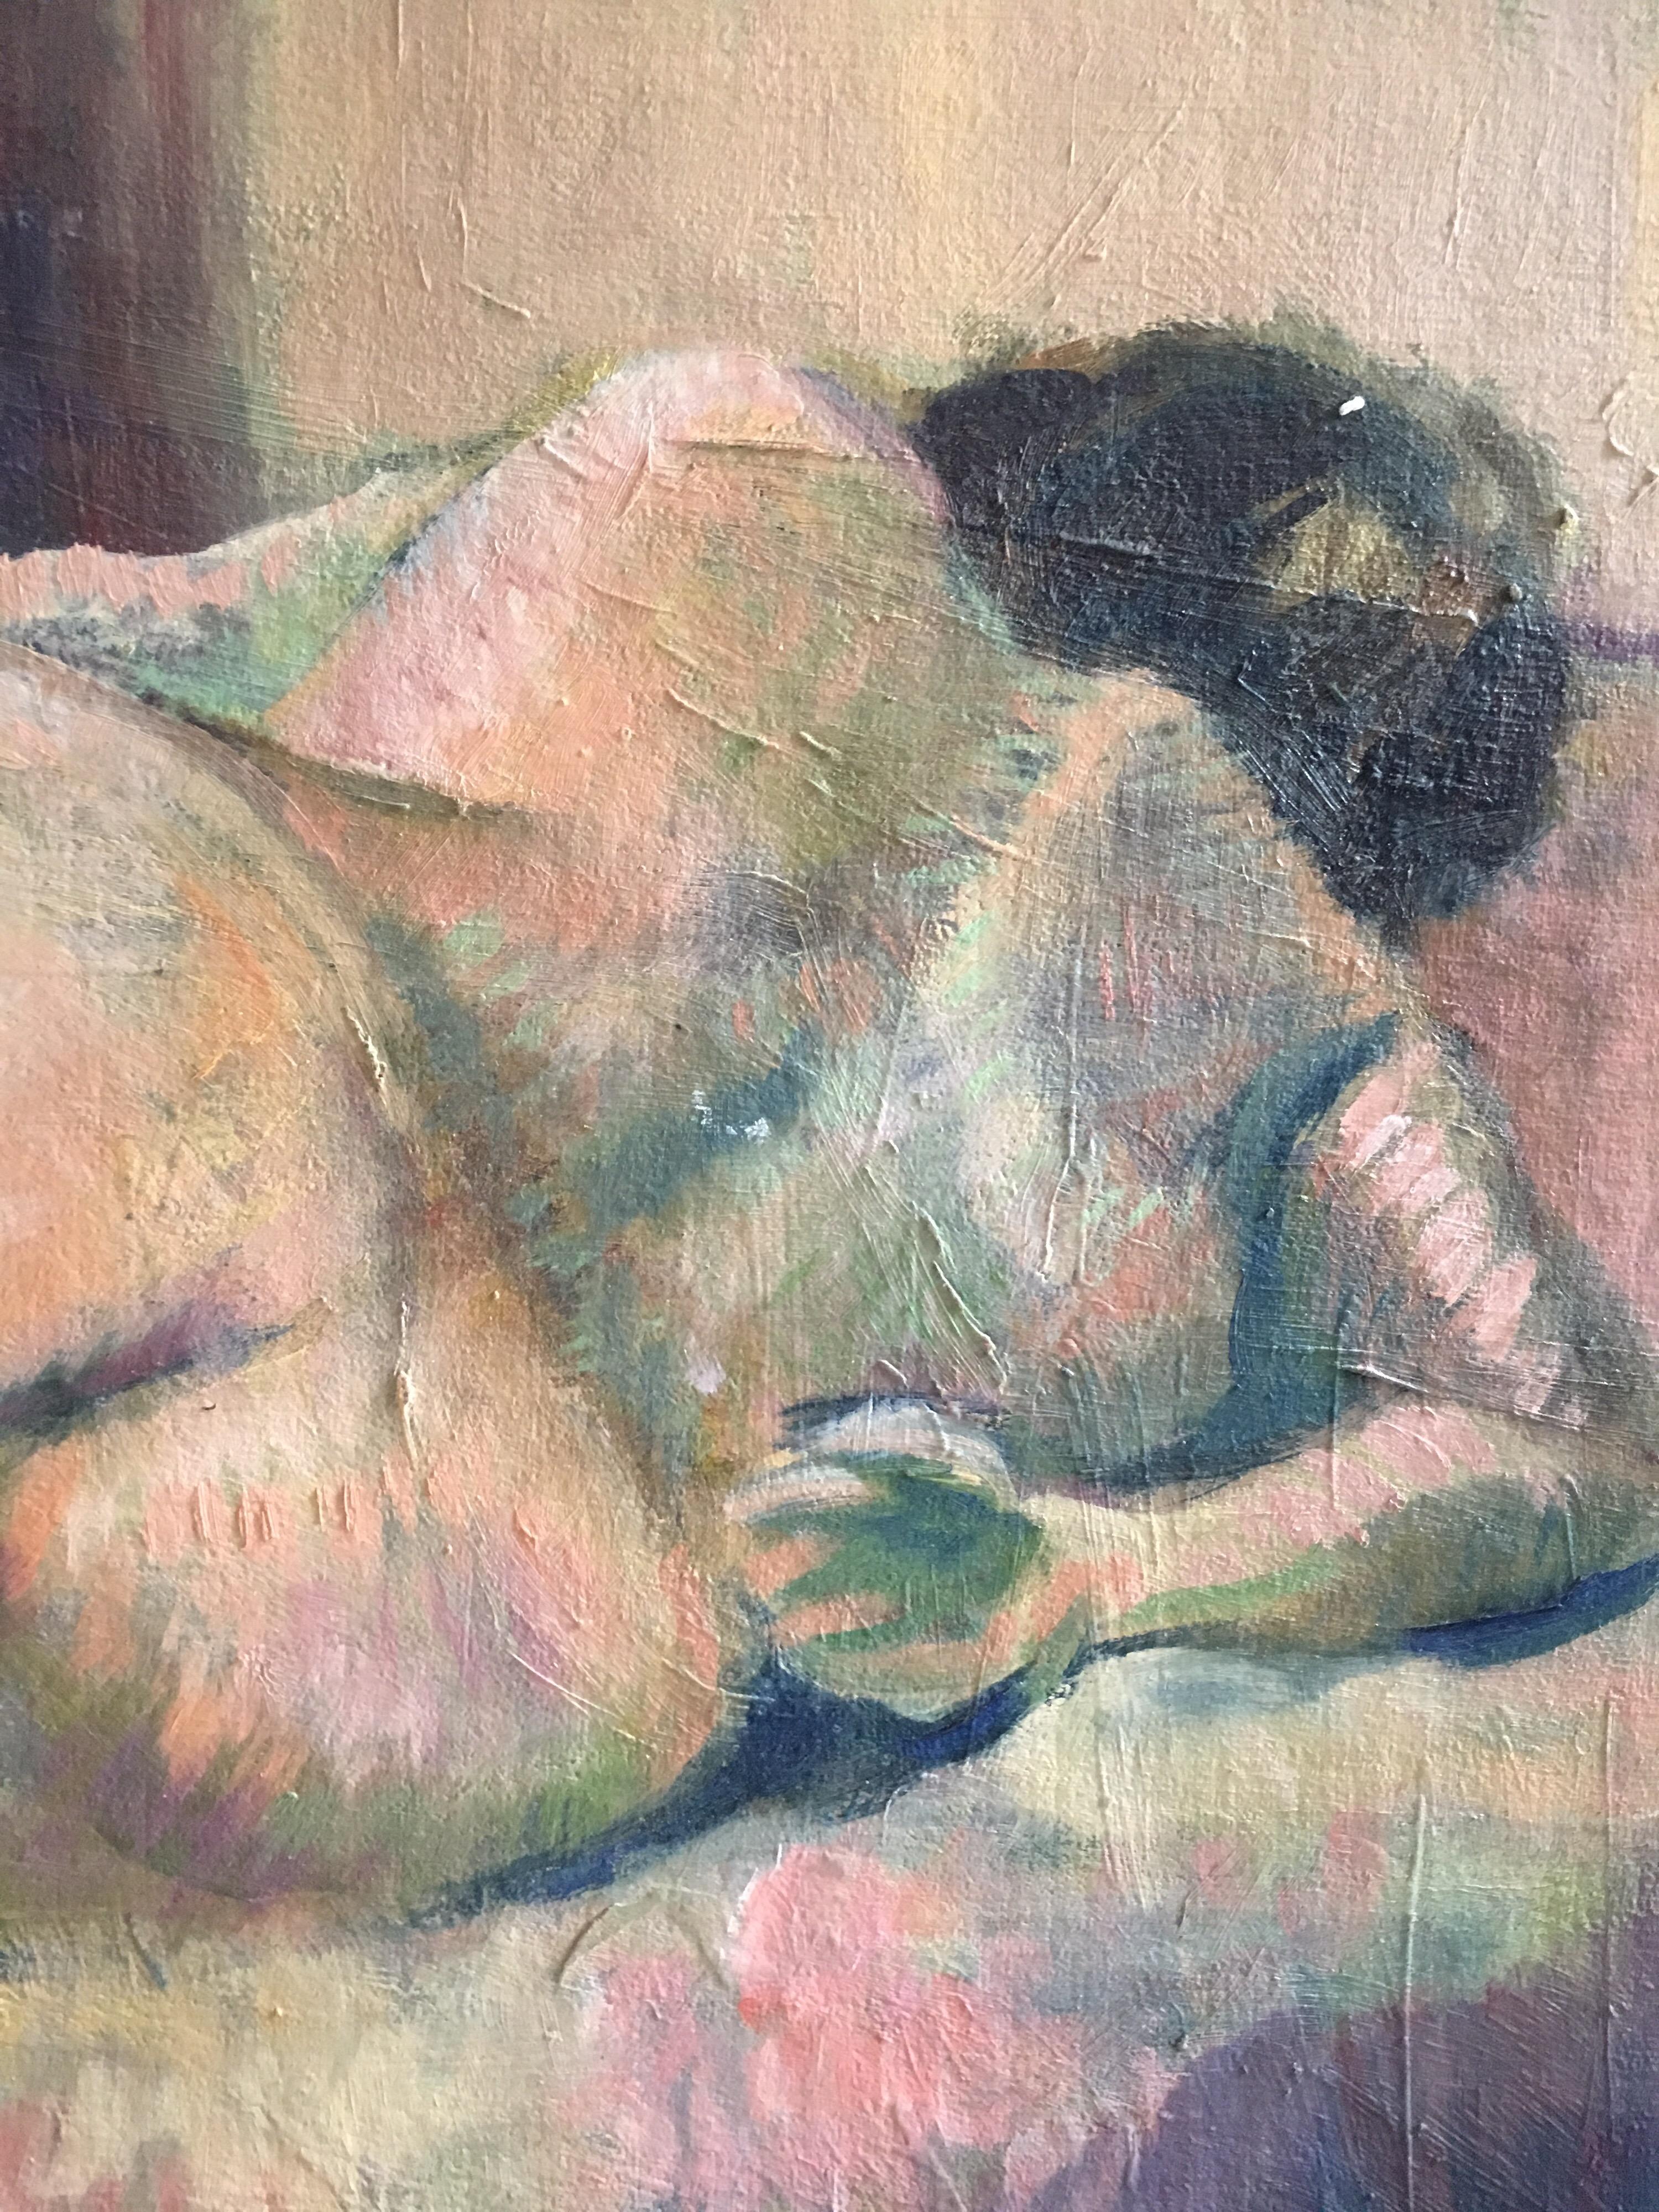 Nude Woman Abstract Oil Painting Mid 20th Century Modern British Artist - Brown Nude Painting by Beryl Darton